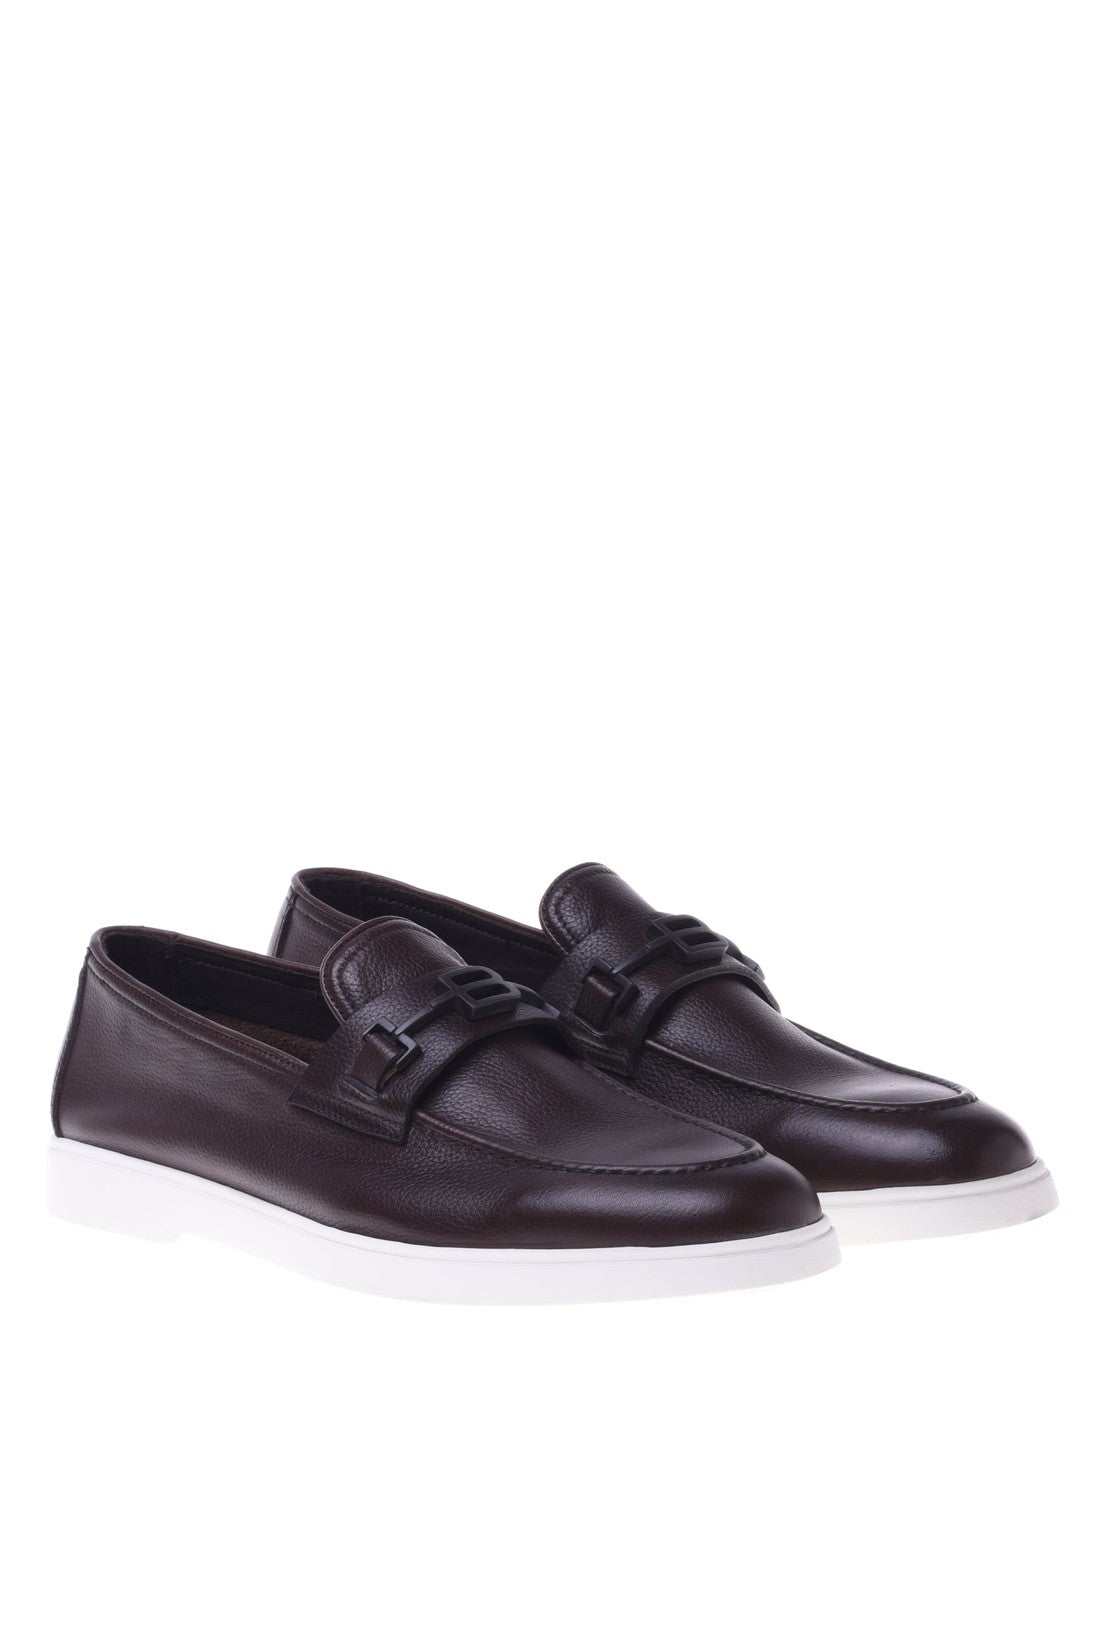 Loafer in brown tumbled leather